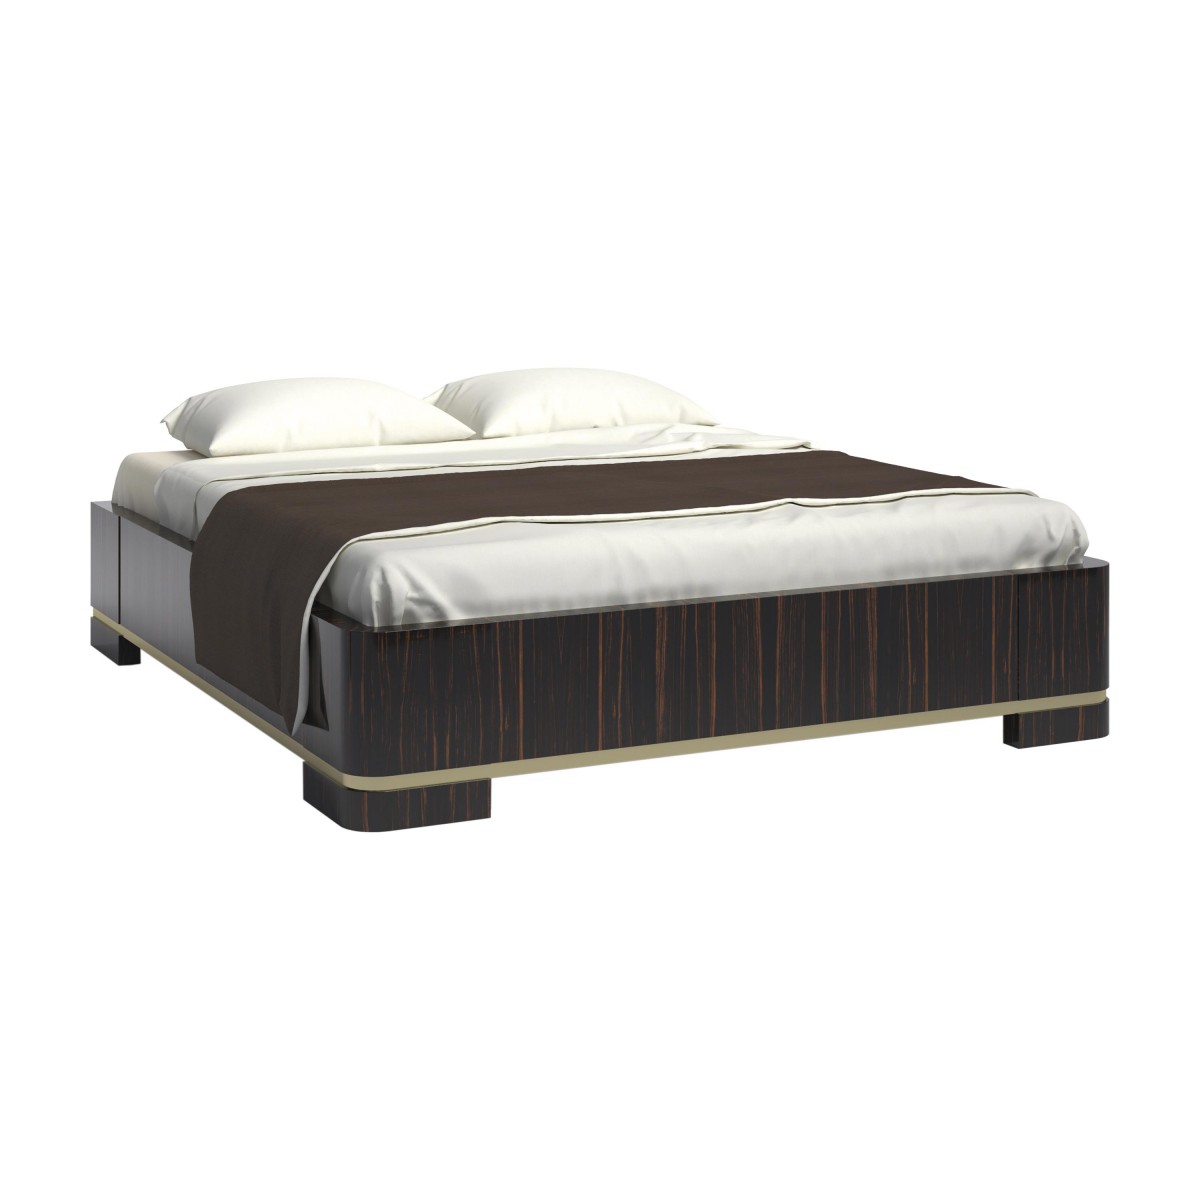 contemporary style wooden bed frame